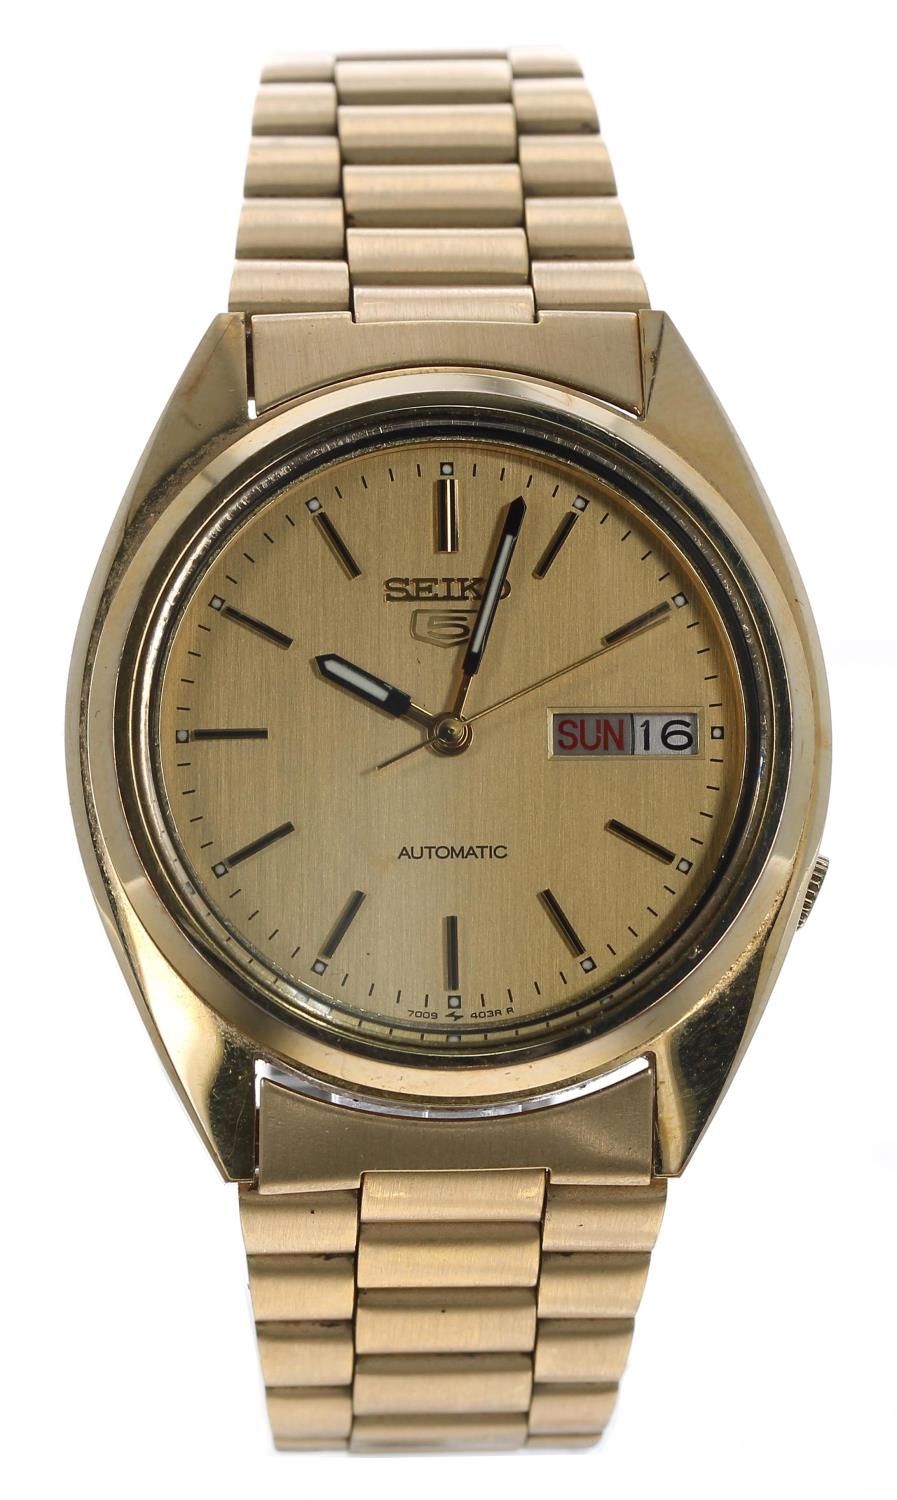 Seiko 5 automatic gold plated and stainless steel gentleman's wristwatch, reference no. 7009-3040,